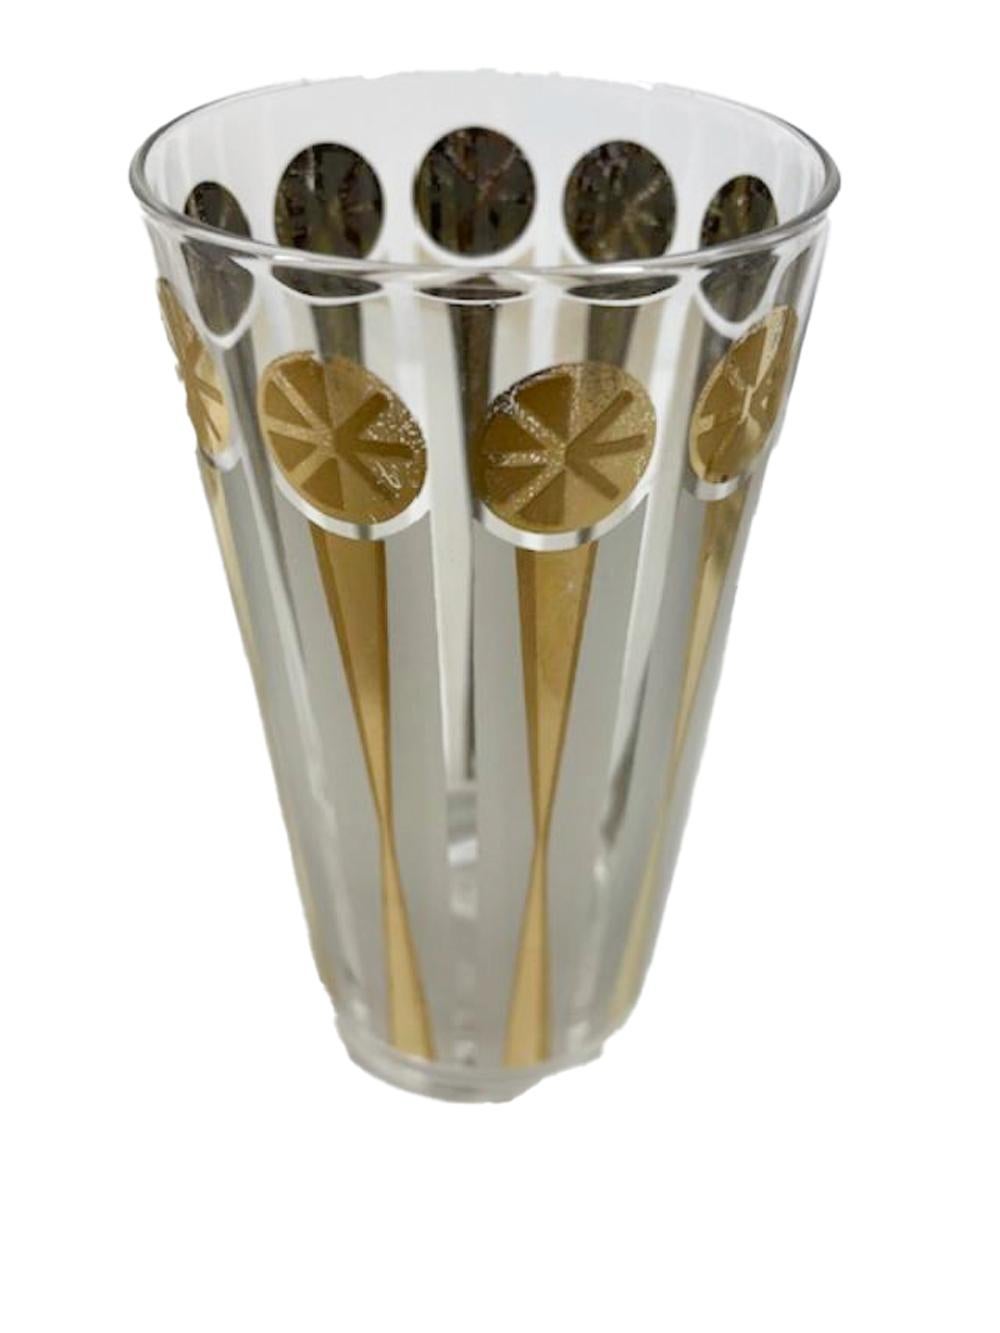 Fred Press Atomic Highball Glasses with Two-Tone Gold and Frosted White Columns In Good Condition For Sale In Nantucket, MA